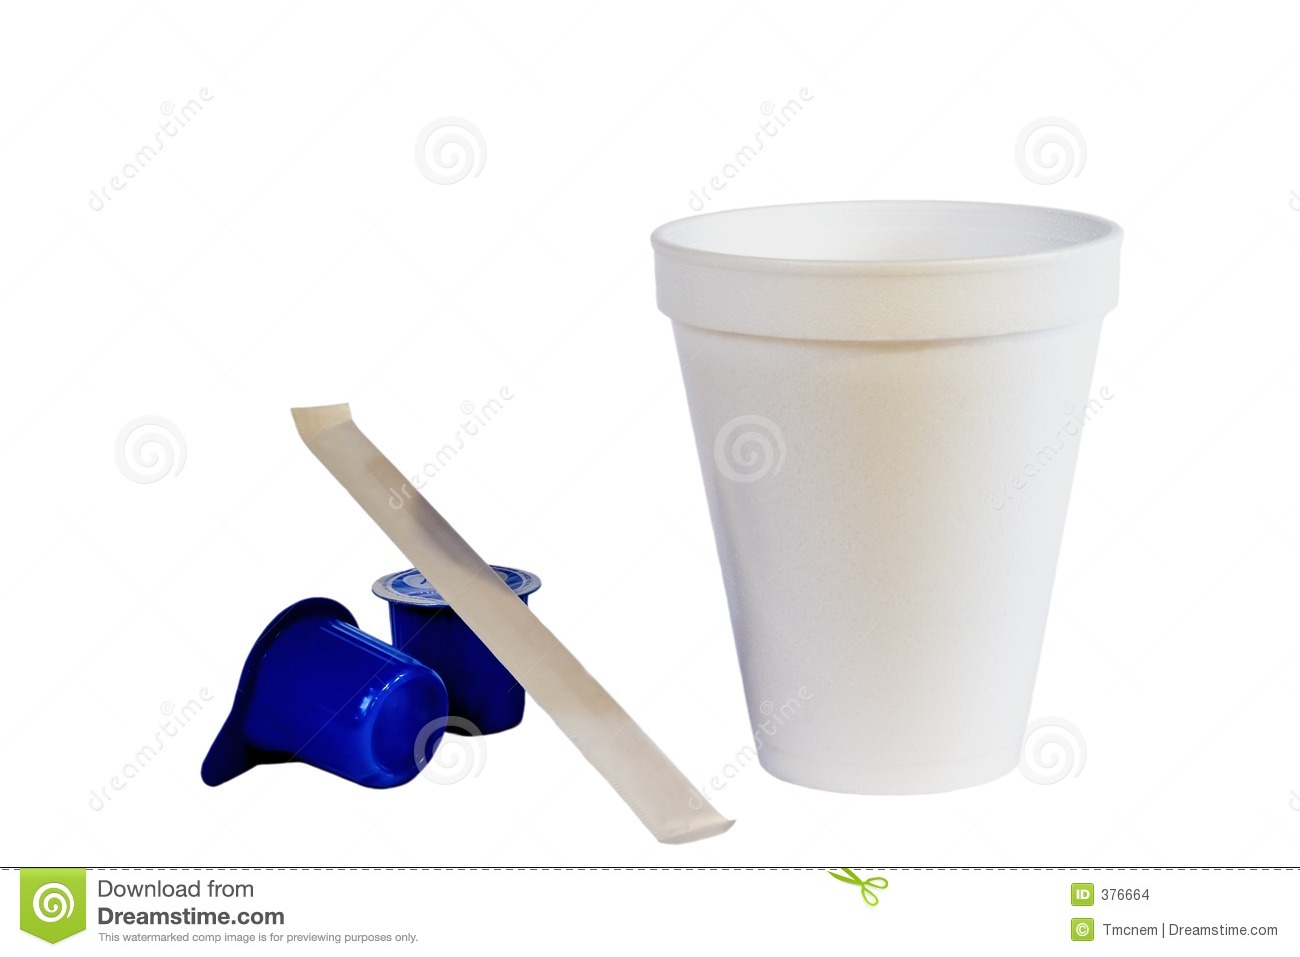 Styrofoam Coffe Cup Creamers And Stir Stick Isolated On White 